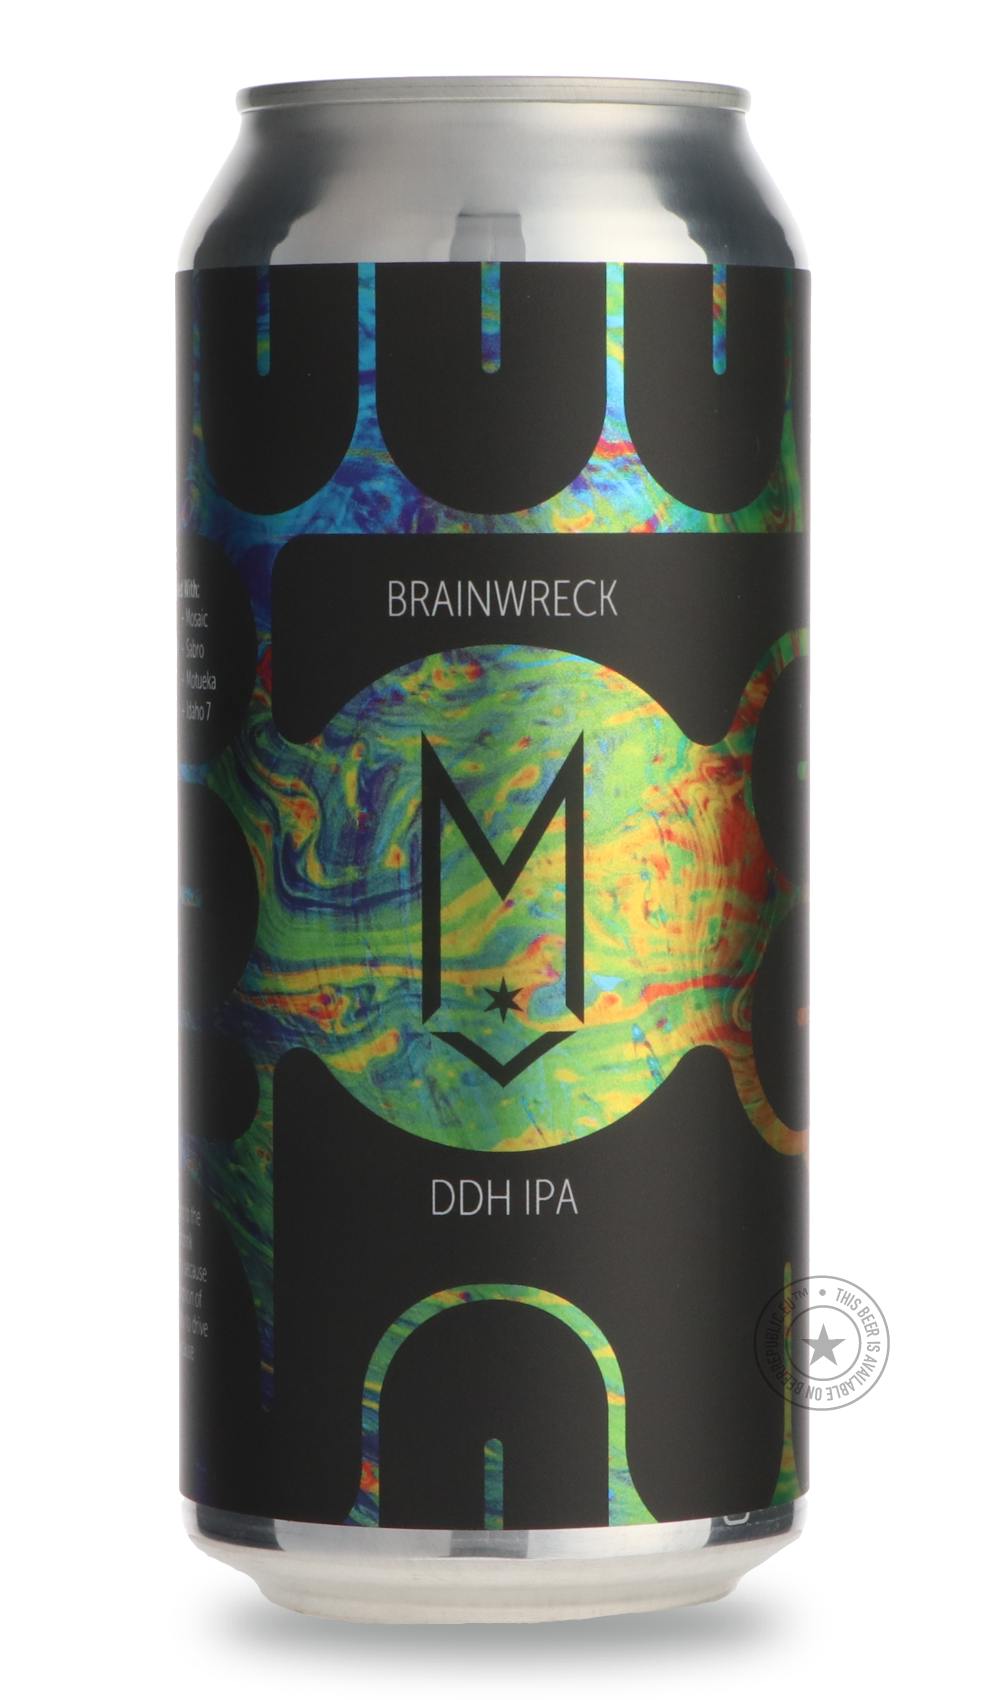 -Maplewood- Brainwreck-IPA- Only @ Beer Republic - The best online beer store for American & Canadian craft beer - Buy beer online from the USA and Canada - Bier online kopen - Amerikaans bier kopen - Craft beer store - Craft beer kopen - Amerikanisch bier kaufen - Bier online kaufen - Acheter biere online - IPA - Stout - Porter - New England IPA - Hazy IPA - Imperial Stout - Barrel Aged - Barrel Aged Imperial Stout - Brown - Dark beer - Blond - Blonde - Pilsner - Lager - Wheat - Weizen - Amber - Barley Win